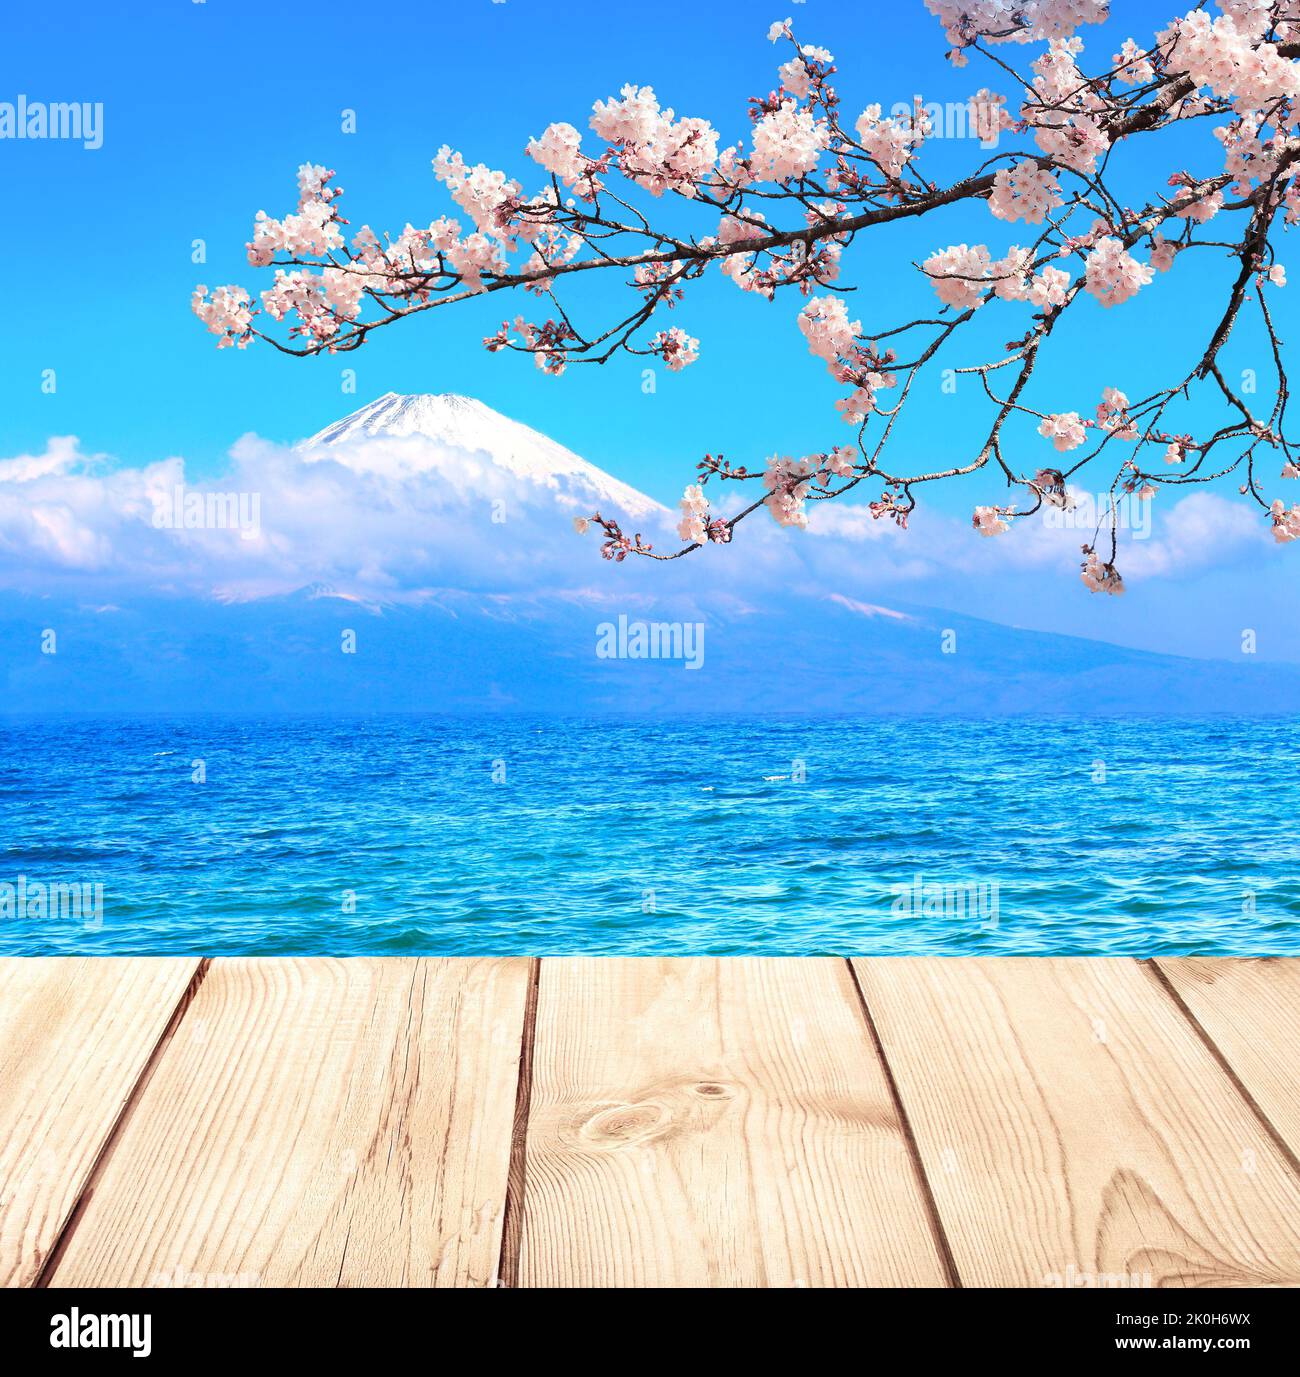 Sacred Mount Fuji, blooming sakura branch, lake and old wooden plank, Japan. Empty wooden table top and scenic with pond and Fujiyama volcano. Rustic Stock Photo